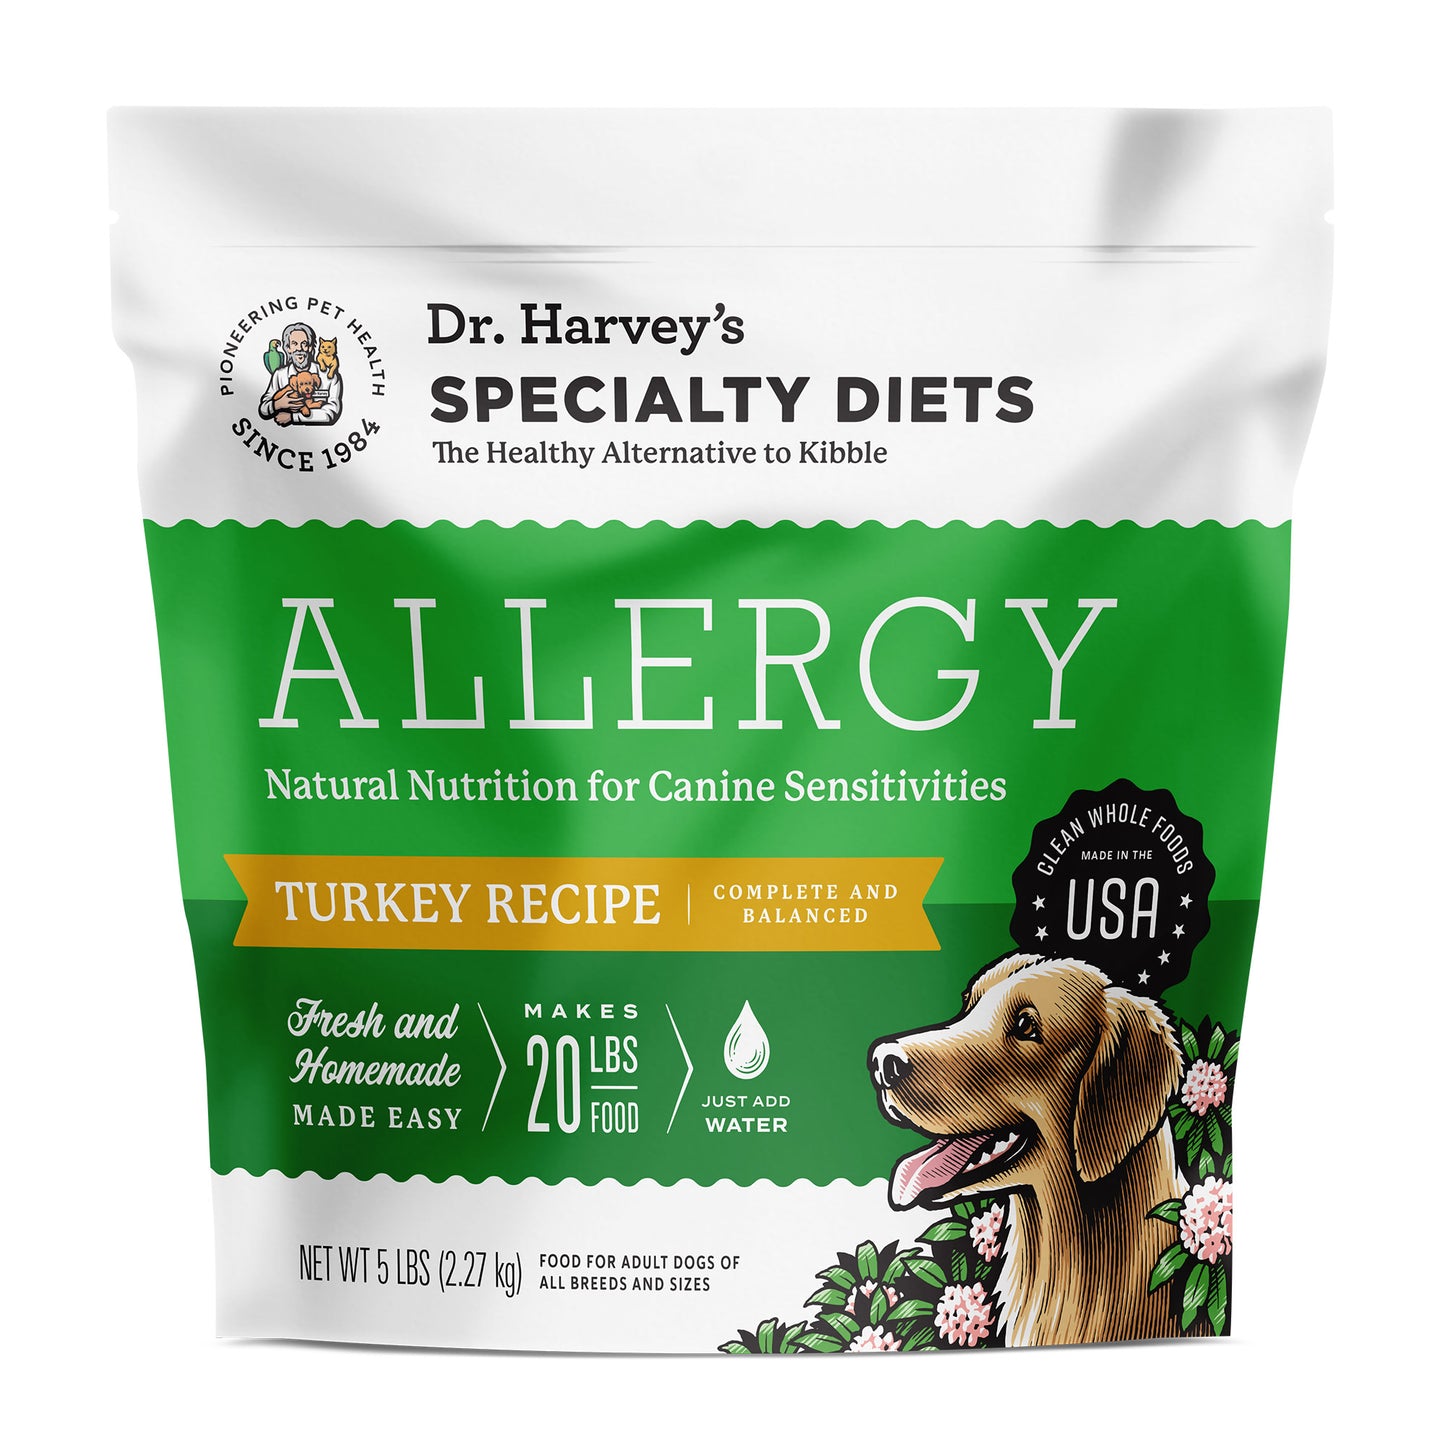 Dr. Harvey’s Specialty Diet Allergy Recipe, Turkey, Human Grade Dog Food for Dogs with Sensitivities and Allergies